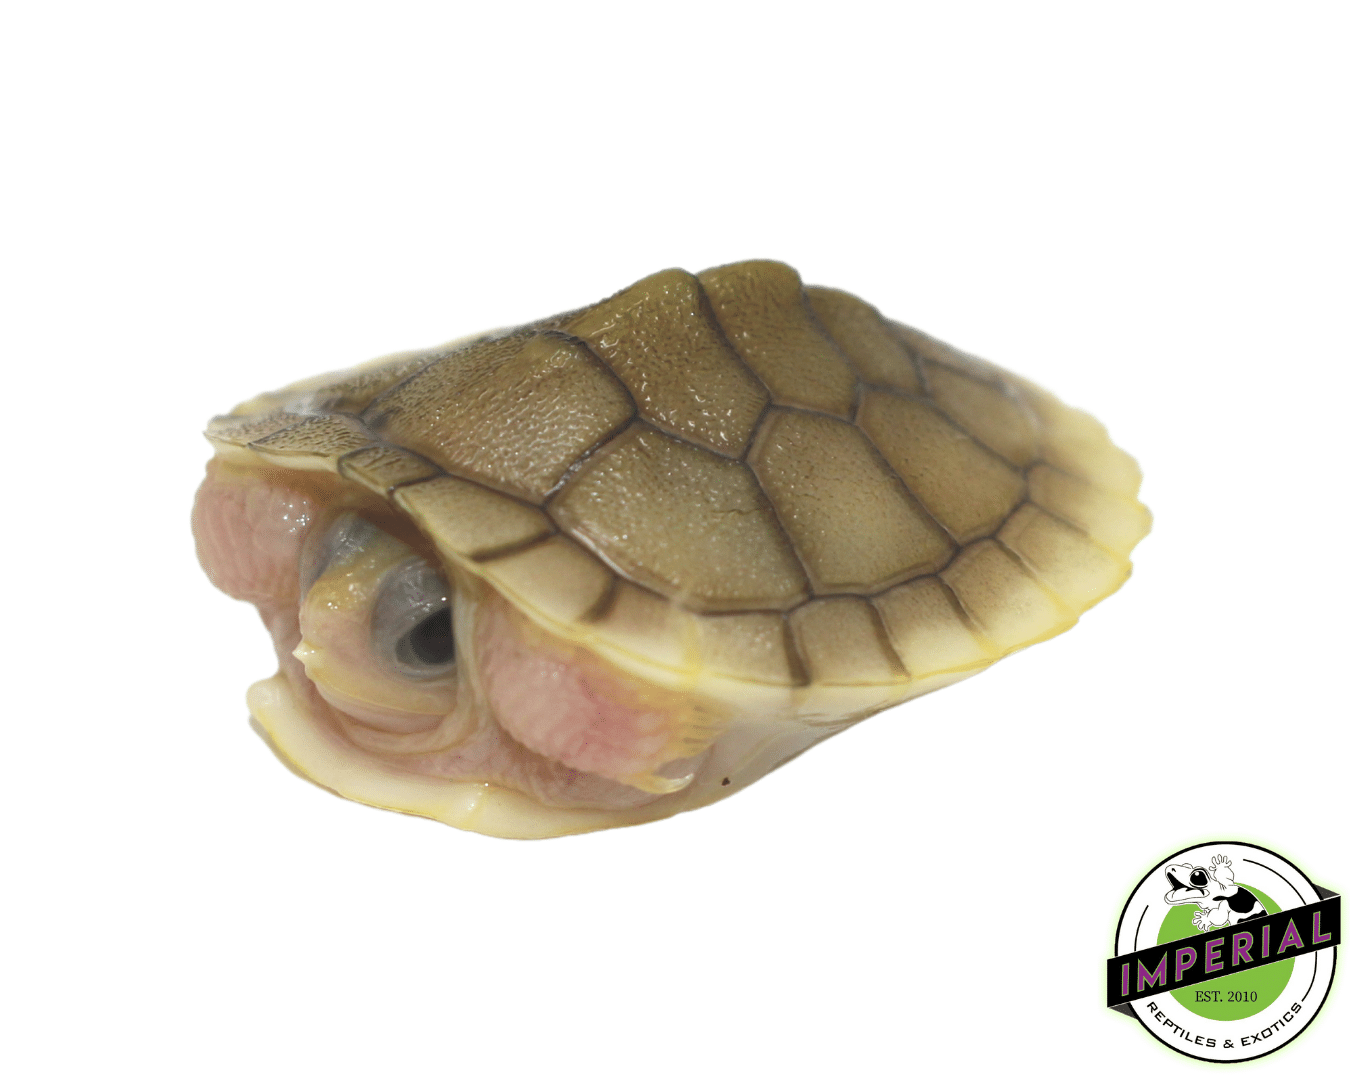 caramel pink albino red ear slider turtle for sale, buy turtles online at cheap prices